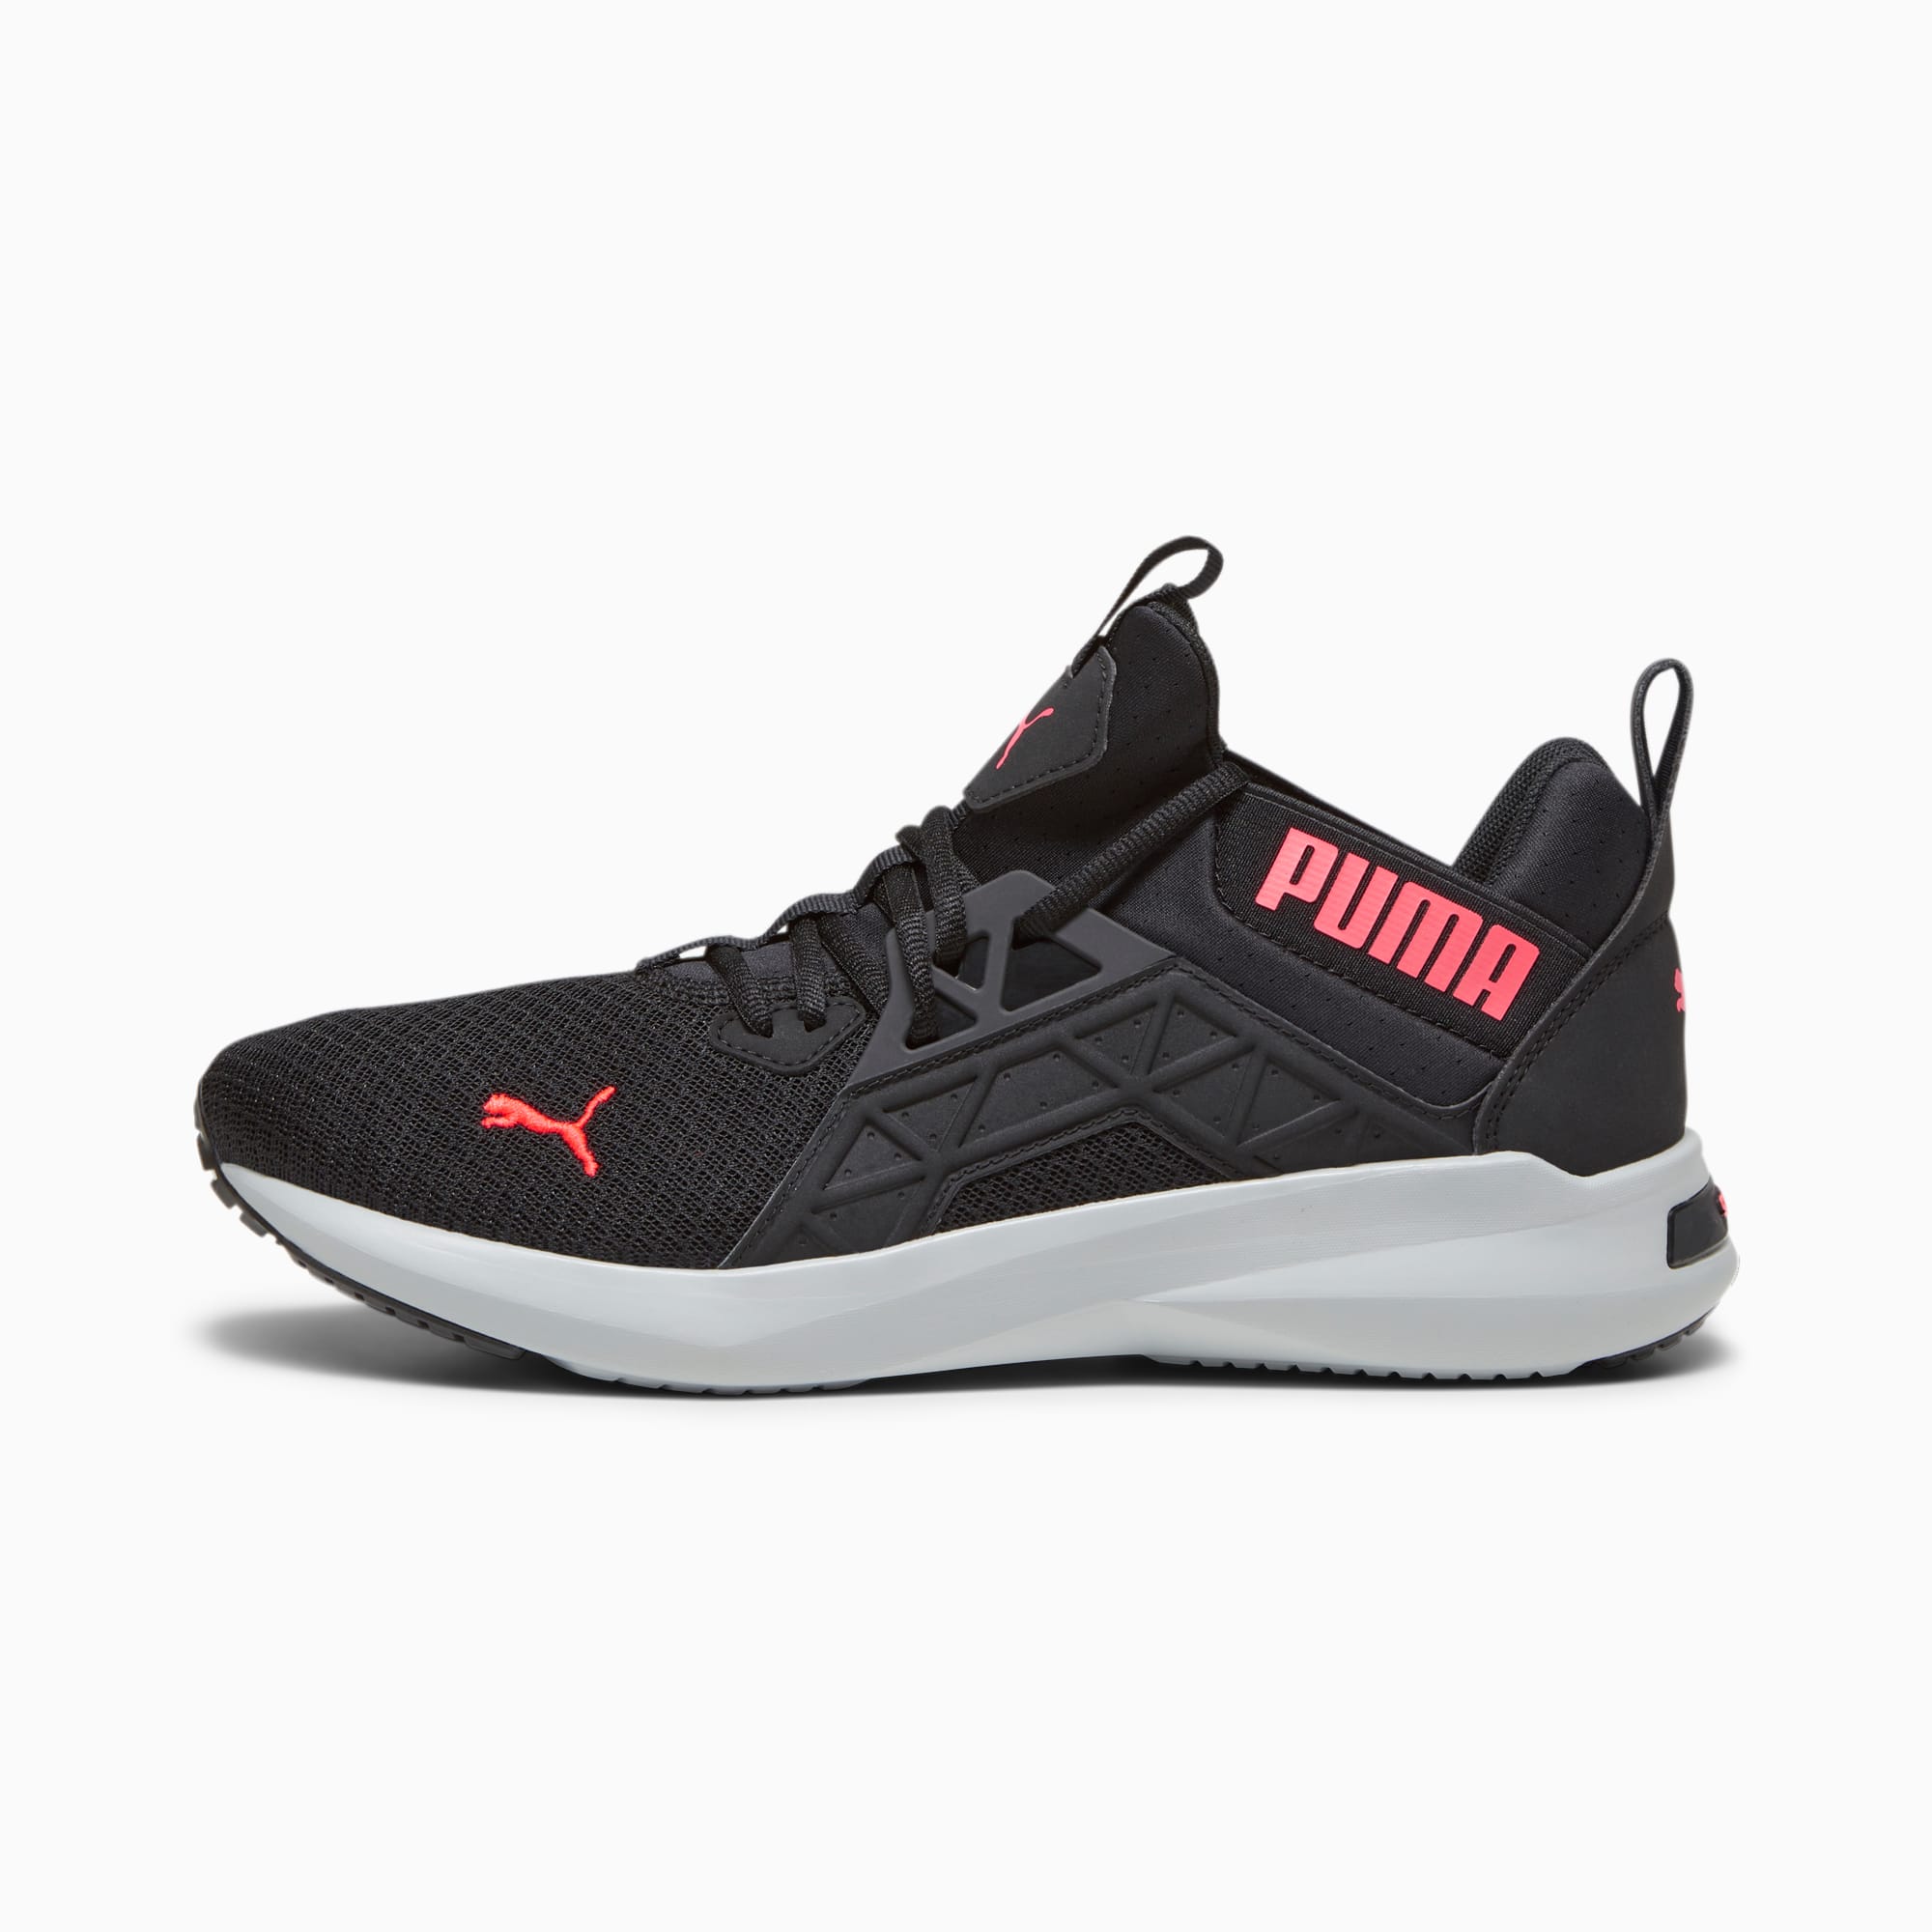 Chaussures de running Softride Enzo NXT Homme